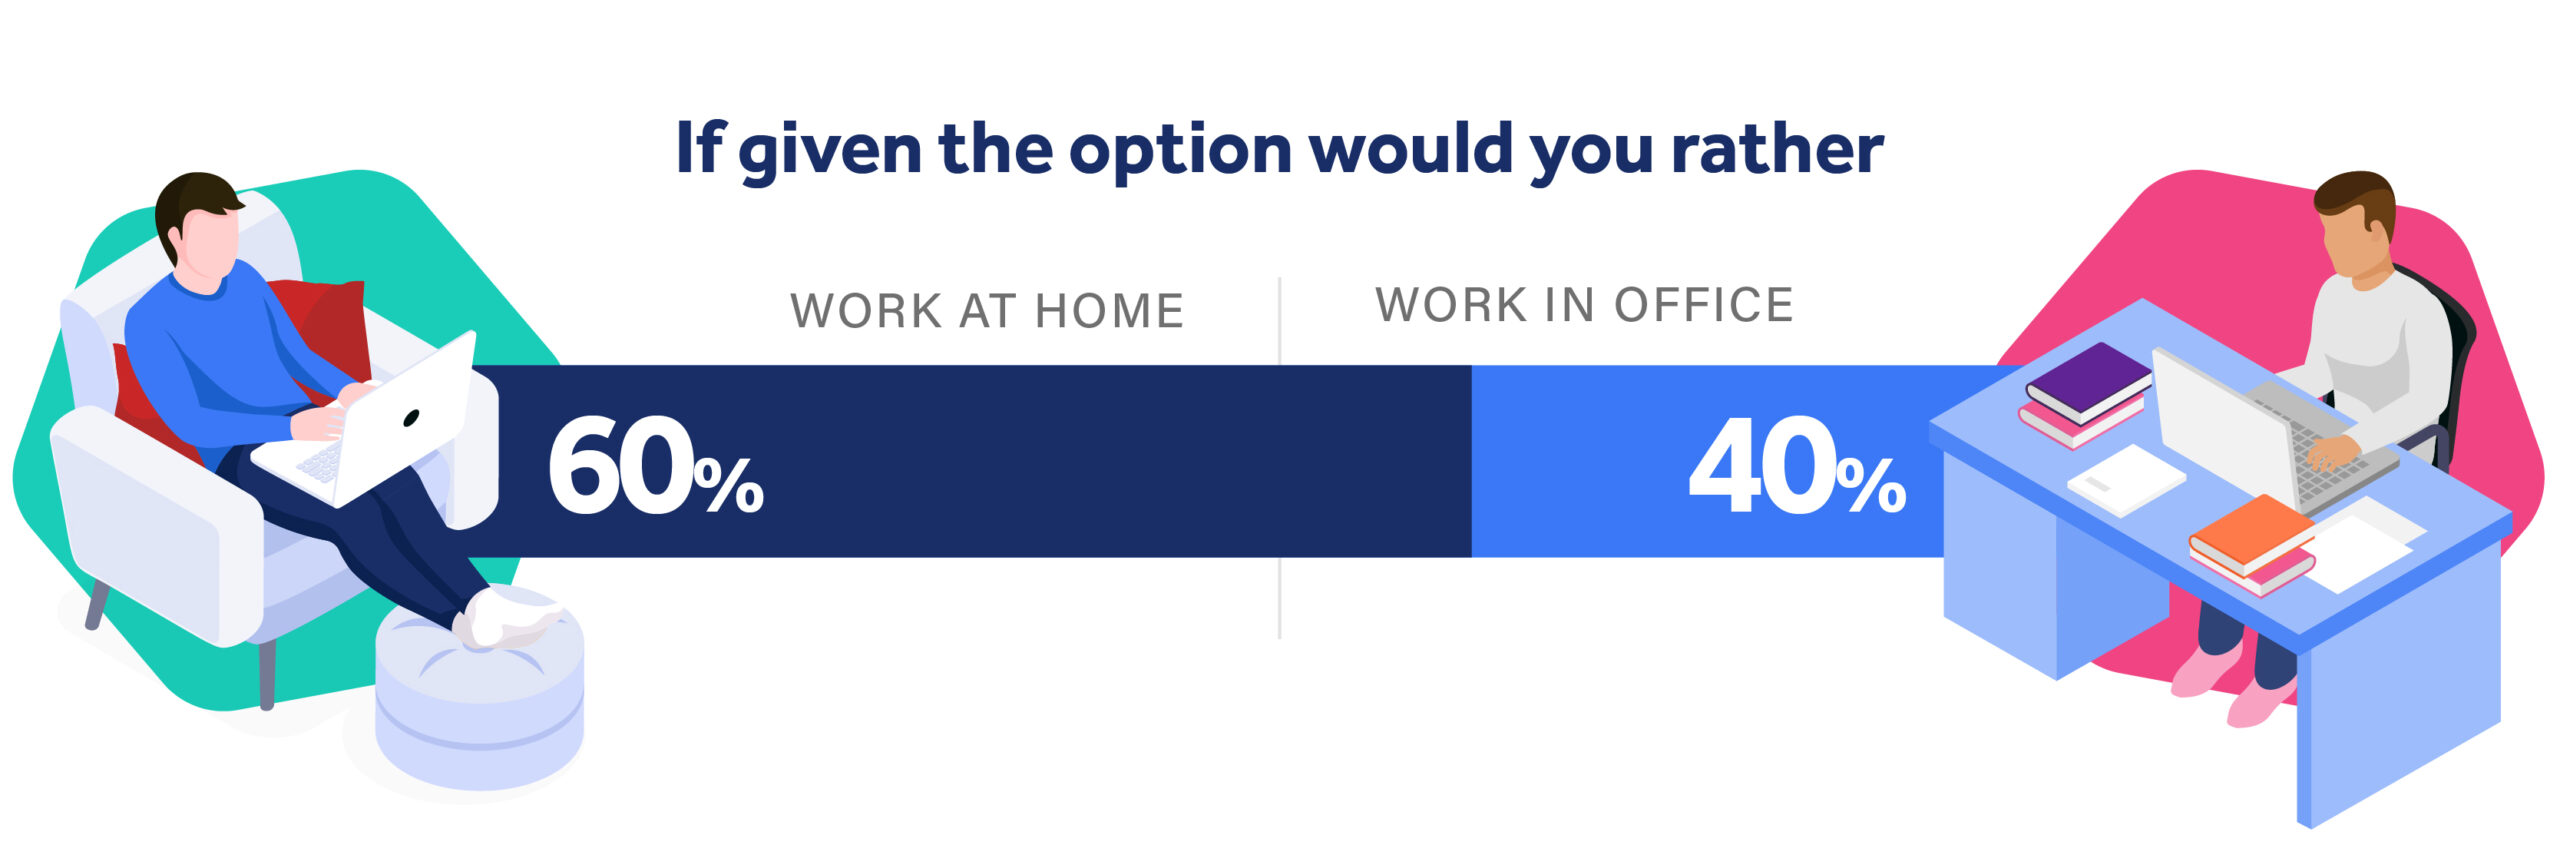 Illustration showing 60% of people want to work at home